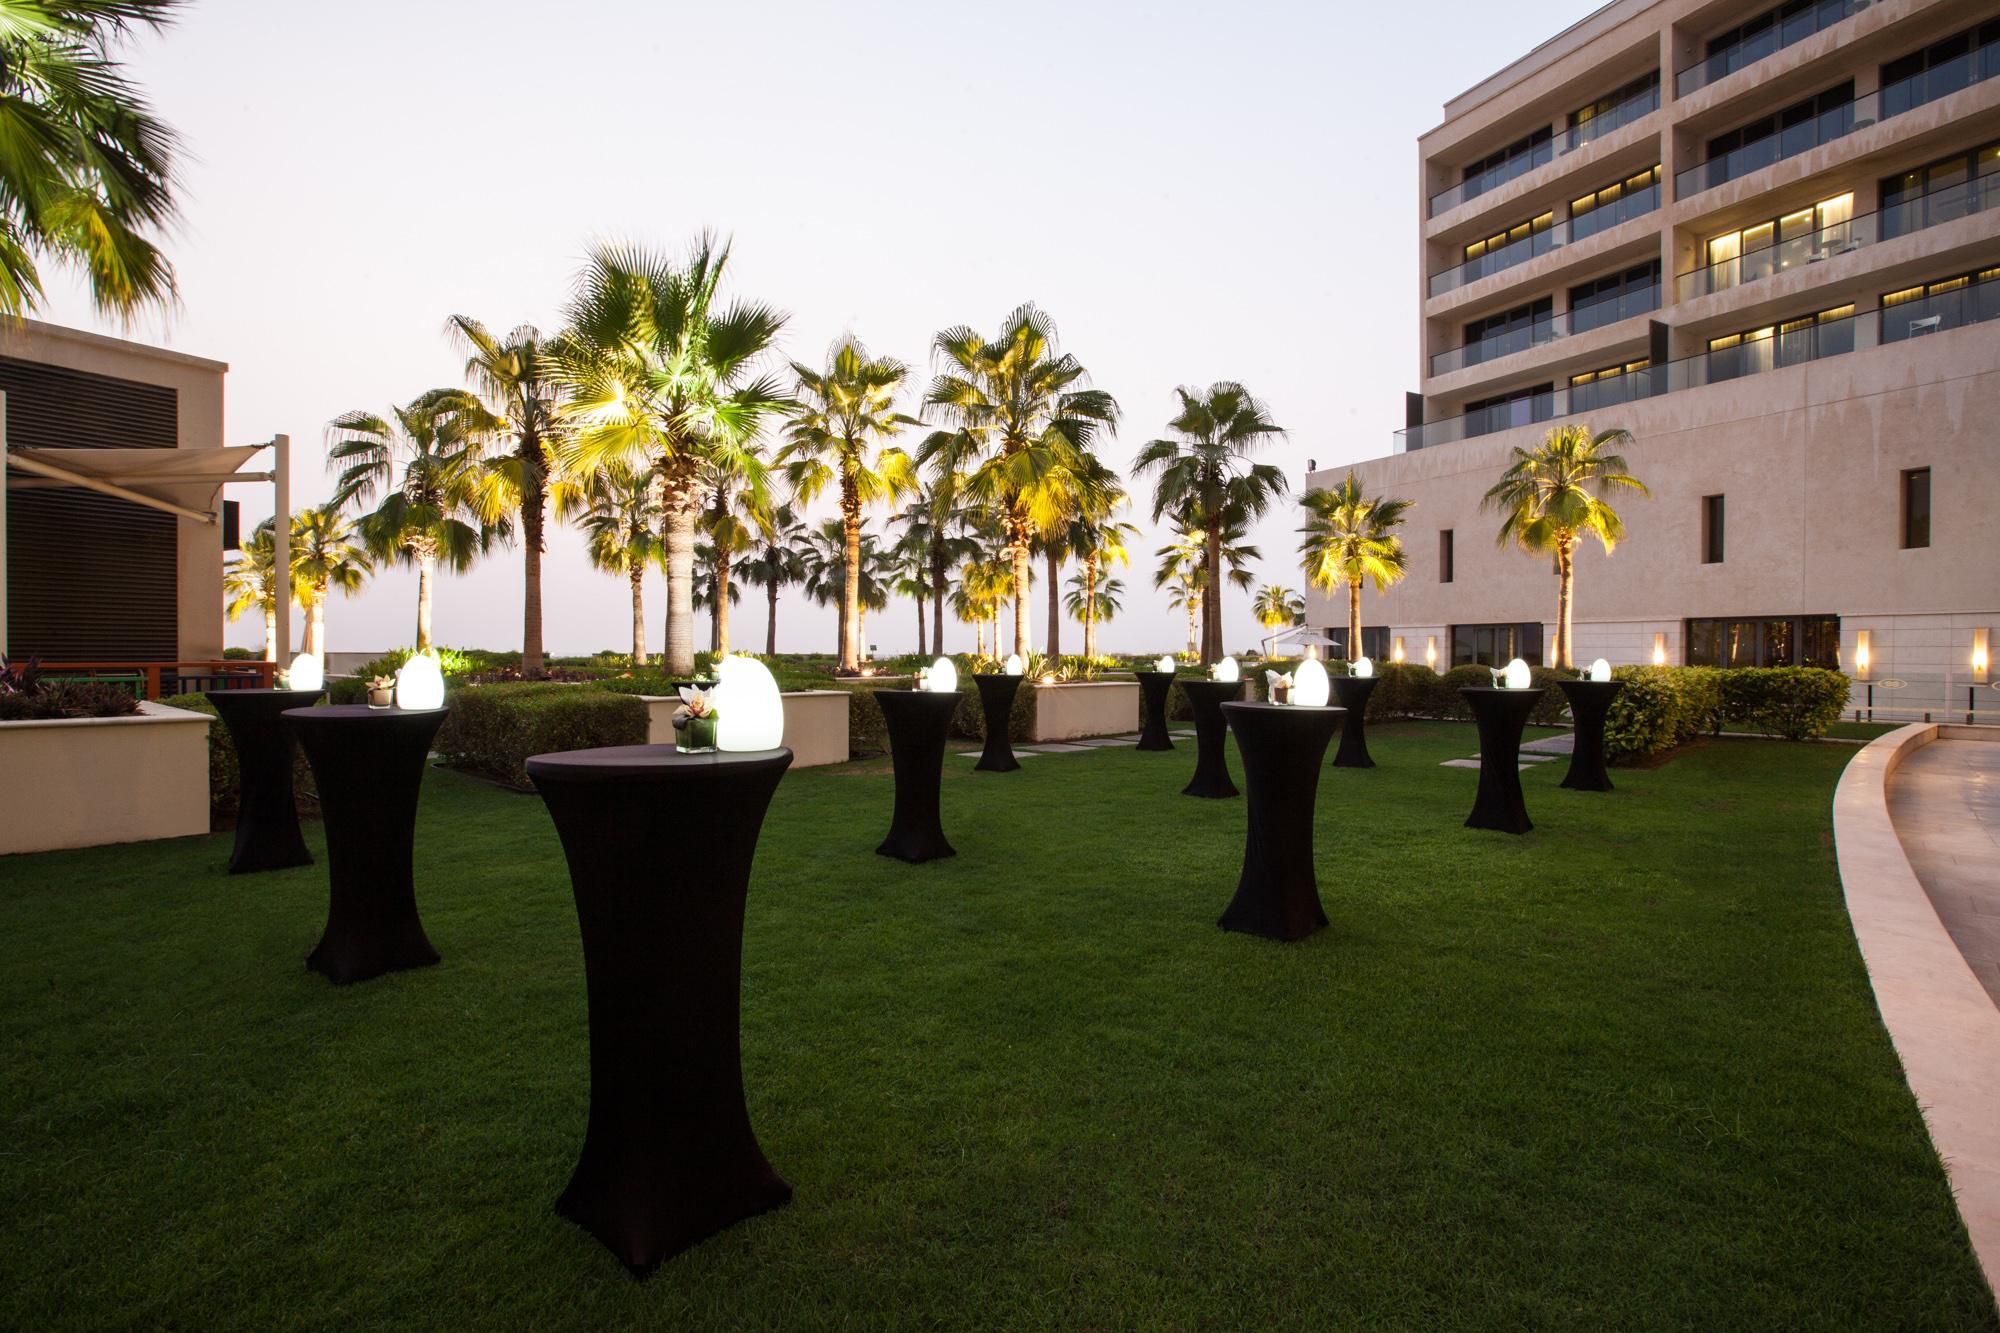 Have evening events at our outdoor terrace with cocktail setup